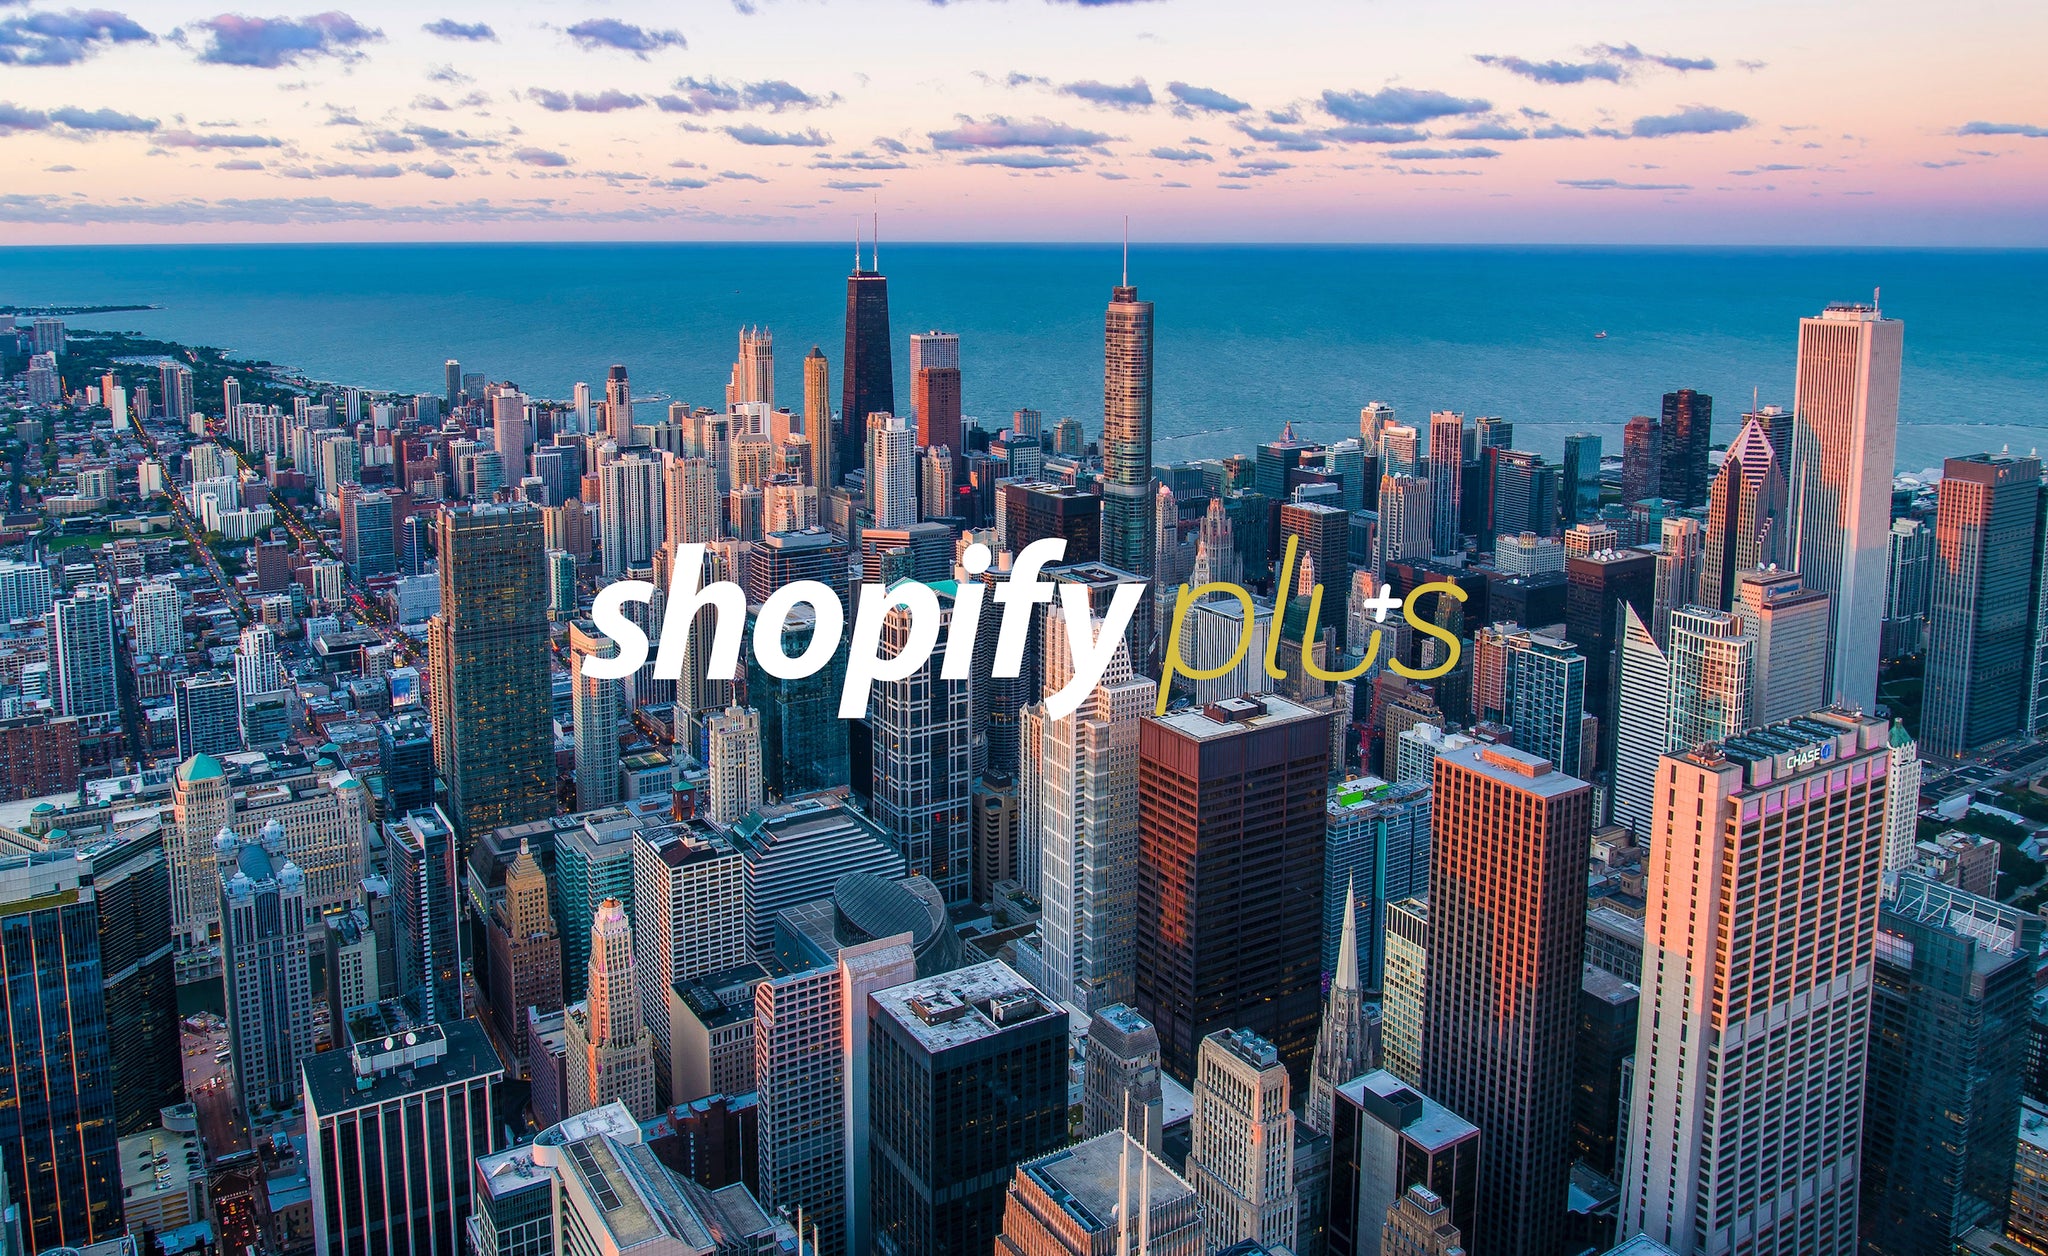 What Are The Best Features of Shopify Plus?